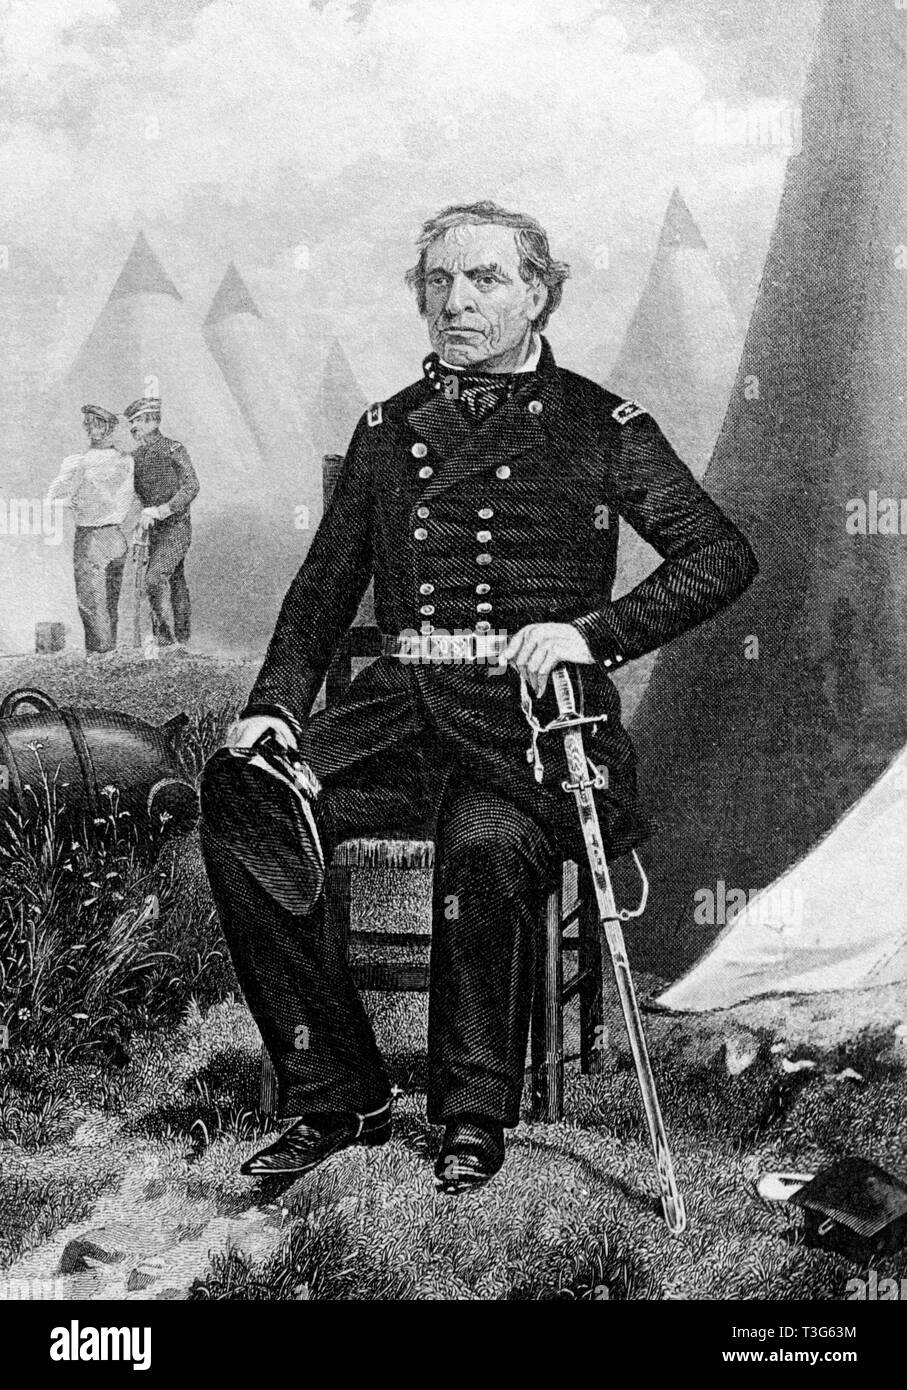 Major General Zachary Taylor, Seated Portrait in Uniform during Mexican-American War 1846-48, Engraving, C.M. Bell, 1870's Stock Photo